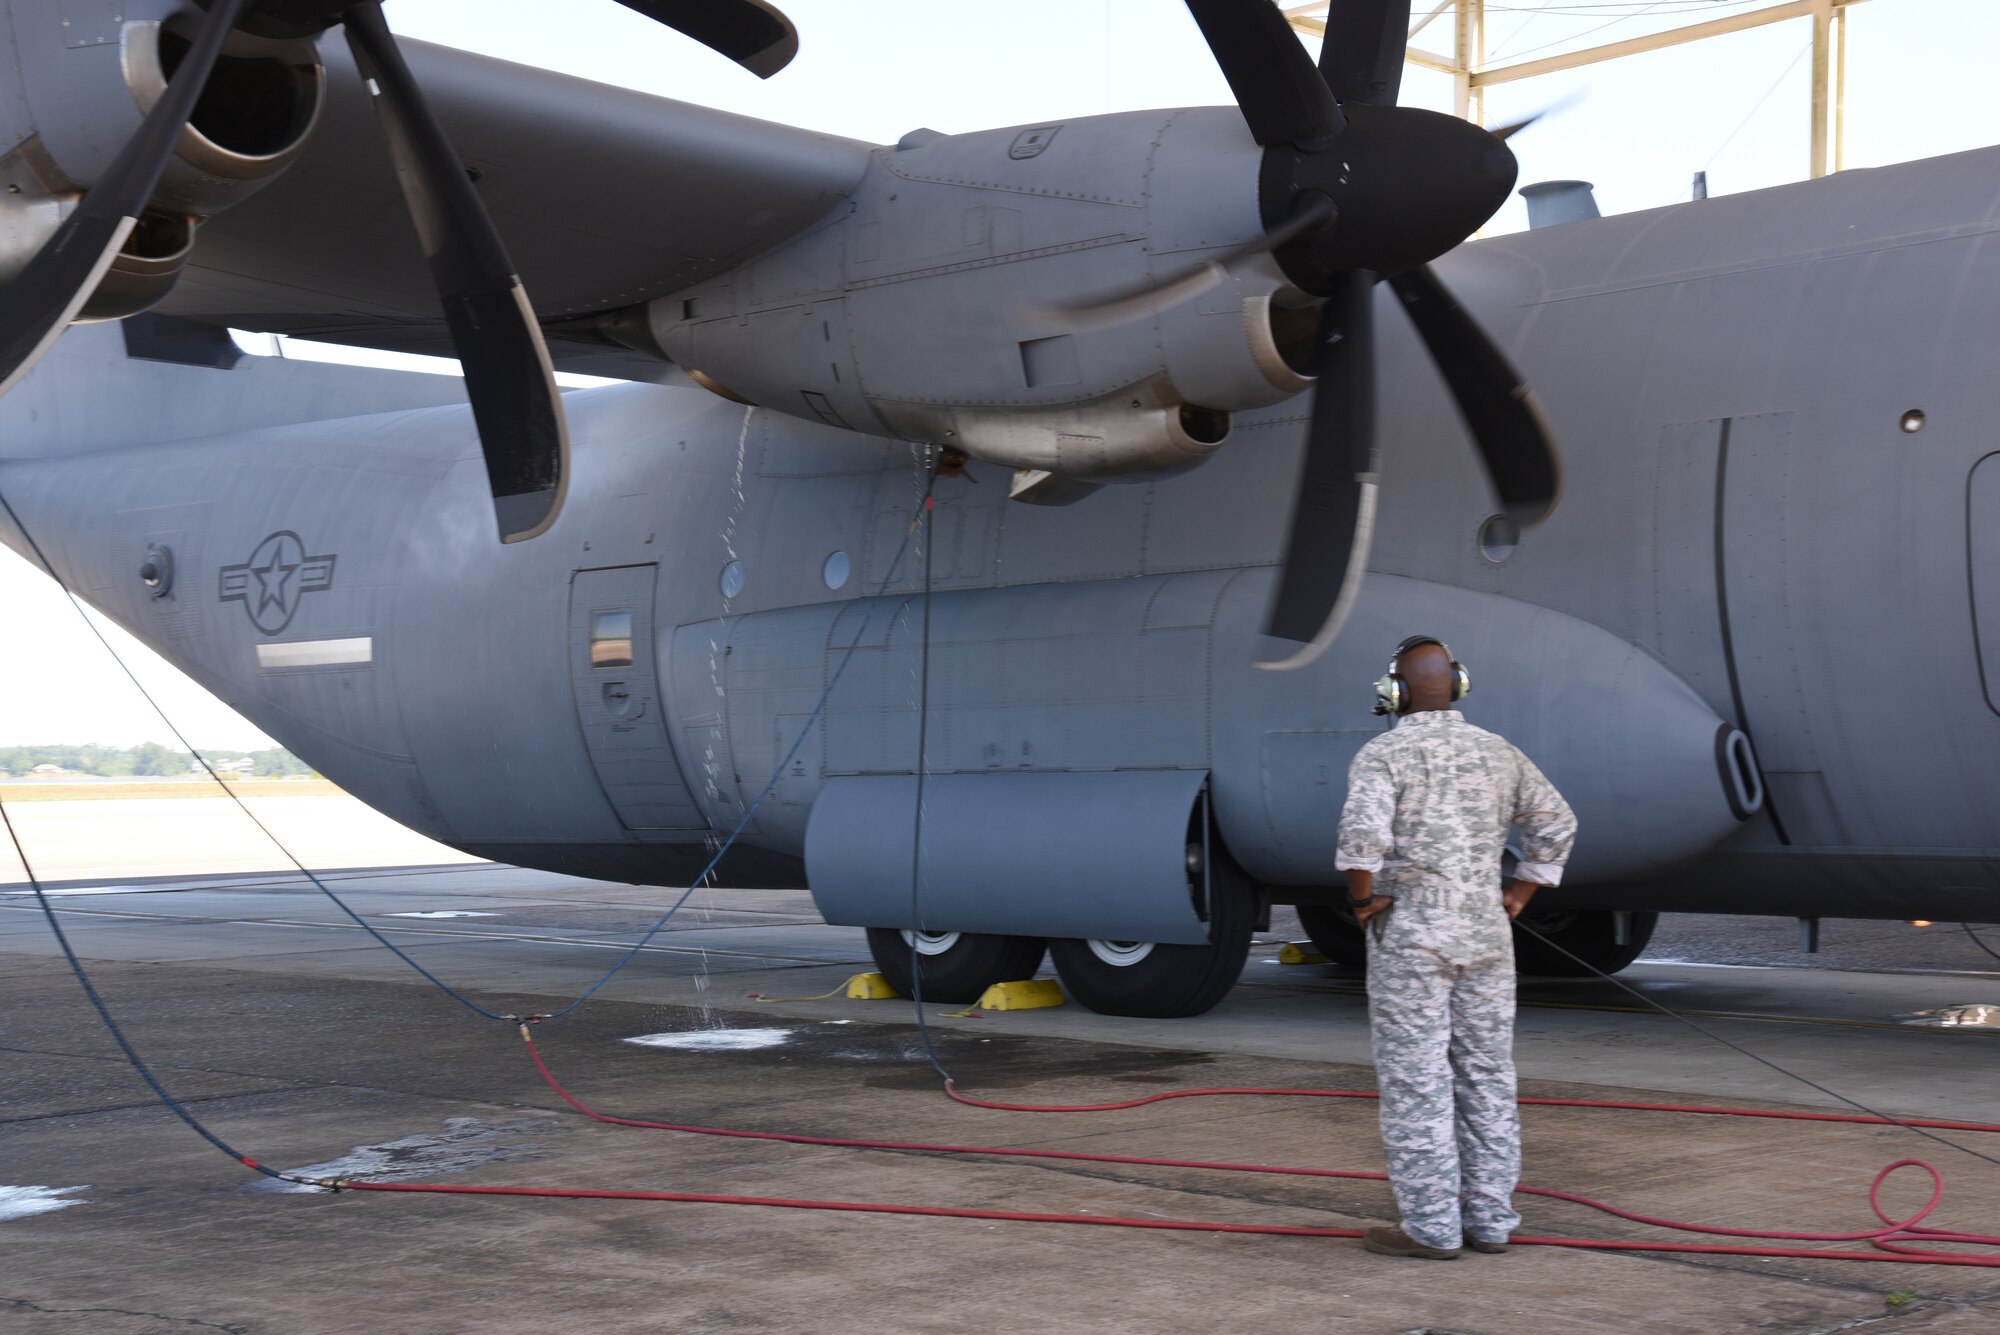 Master Sgt. Donald Maloid, 403rd Maintenance Squadron propulsion technician, checks the water spray and mist that comes out of the engine compartment during the Engine Compressor Wash of an 815th Airlift Squadron C-130J Super Hercules to ensure the engine is clean before the aircraft goes for a "C" letter inspection in the Isochronal Dock at Keesler Air Force Base, Mississippi May 11, 2020. These inspections or letter checks can range from "A" five days basic check, "B" 18 days and more in depth, to "C" 22 days which is the most intrusive inspection; but are necessary to keep the aircraft maintained. (U.S. Air Force photo by Jessica L. Kendziorek)